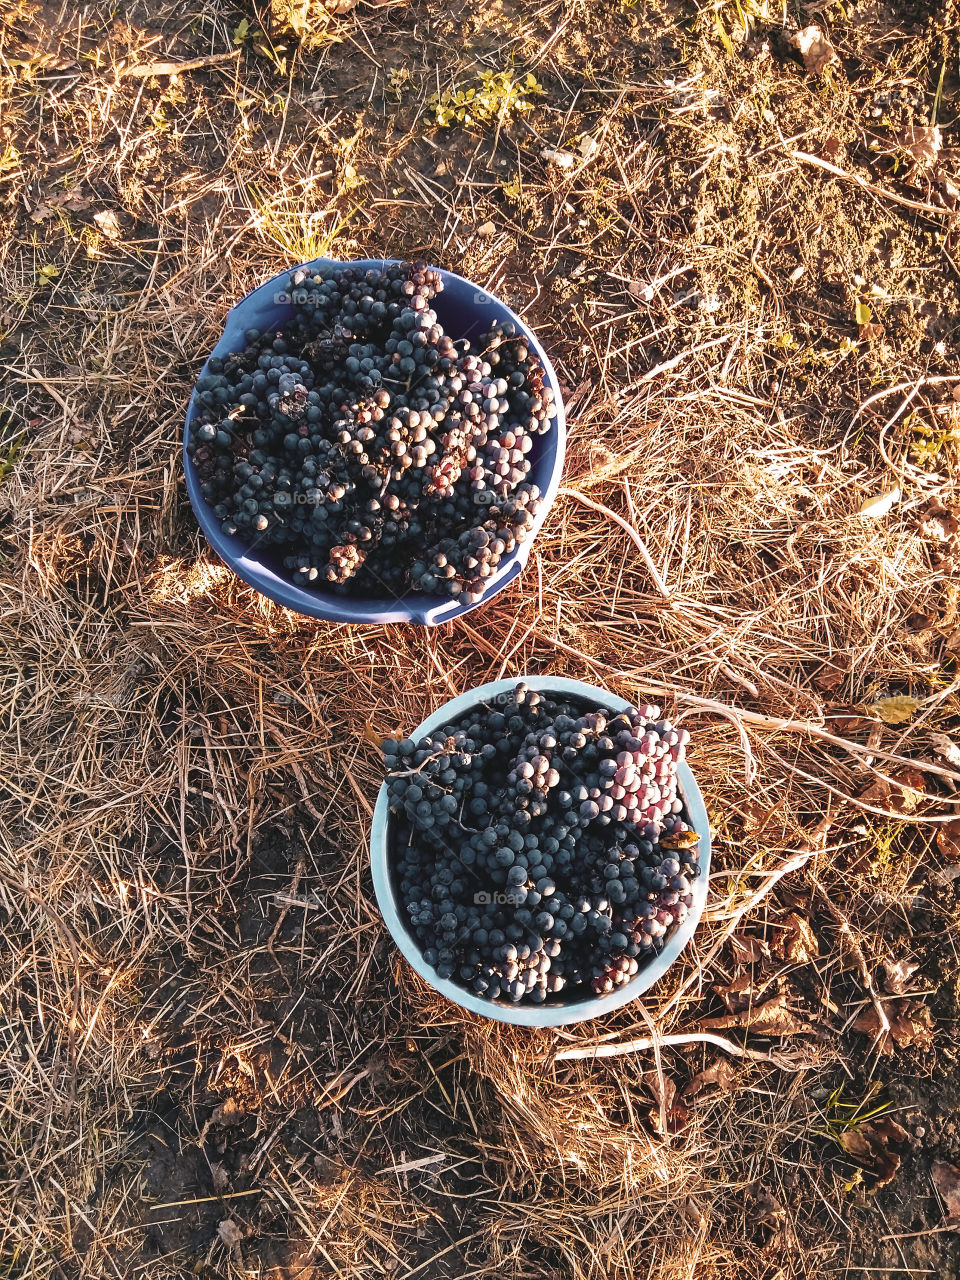 harvest: two bowls of grapes in the hay